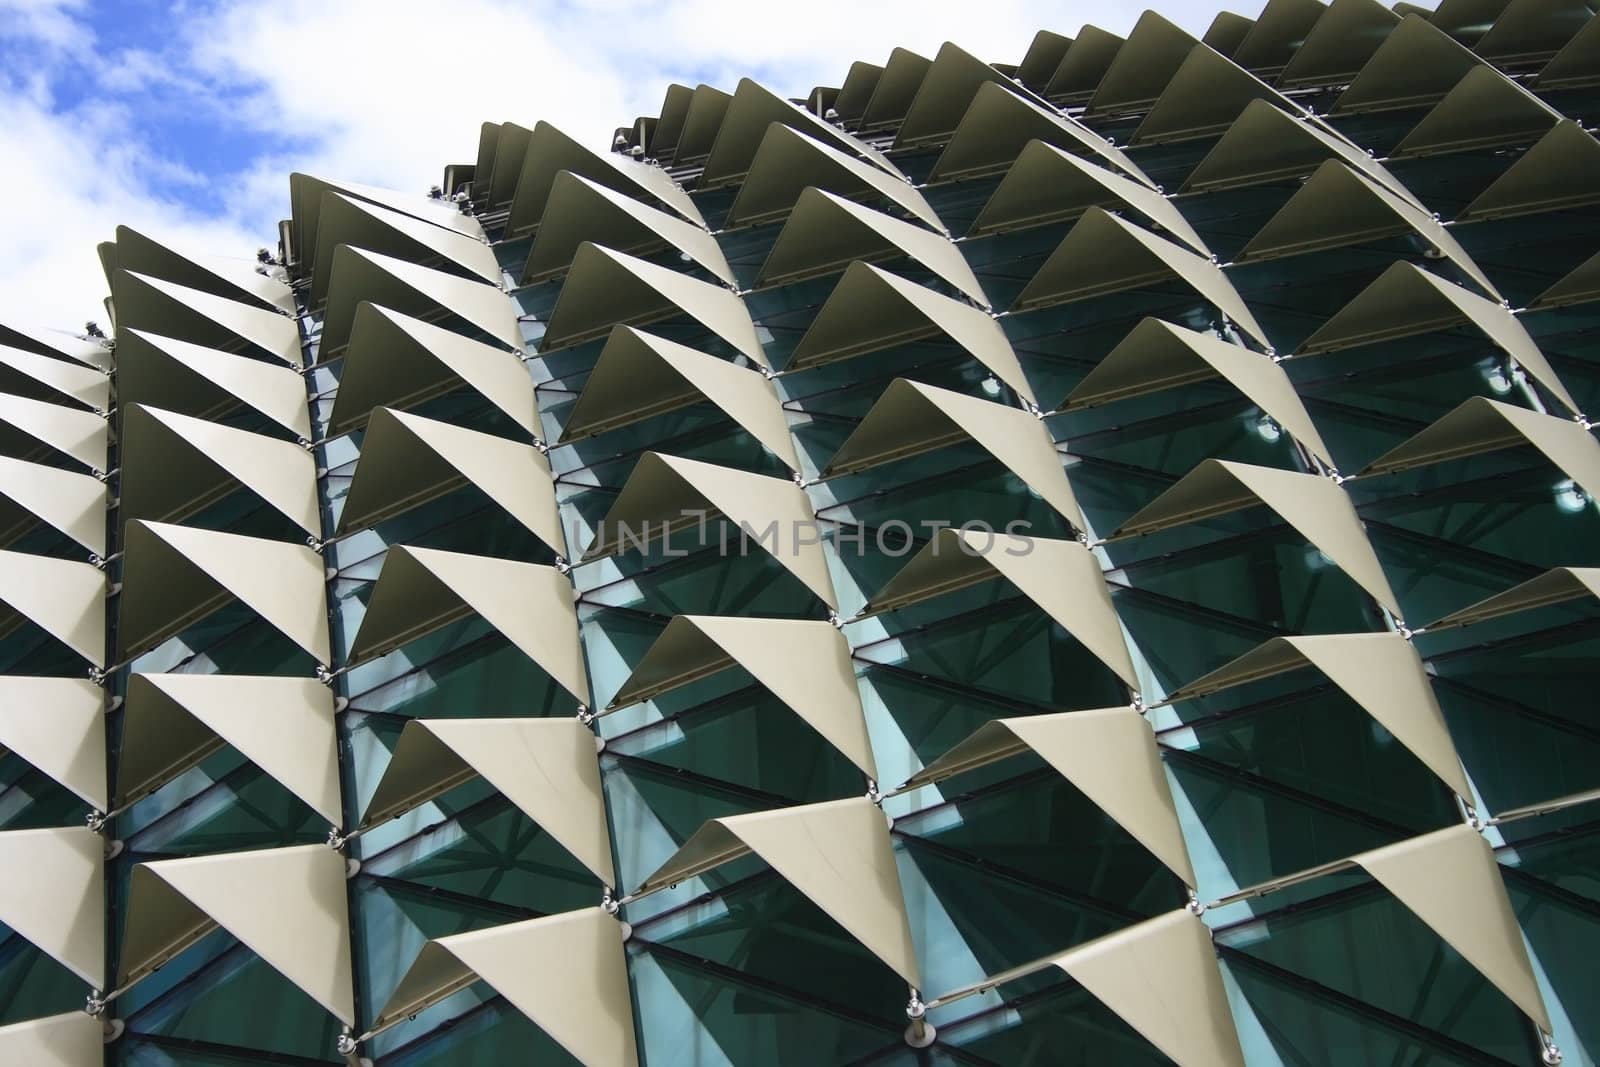 Roof of Esplanade, a landmark building in Singapore form a pattern can use in design.